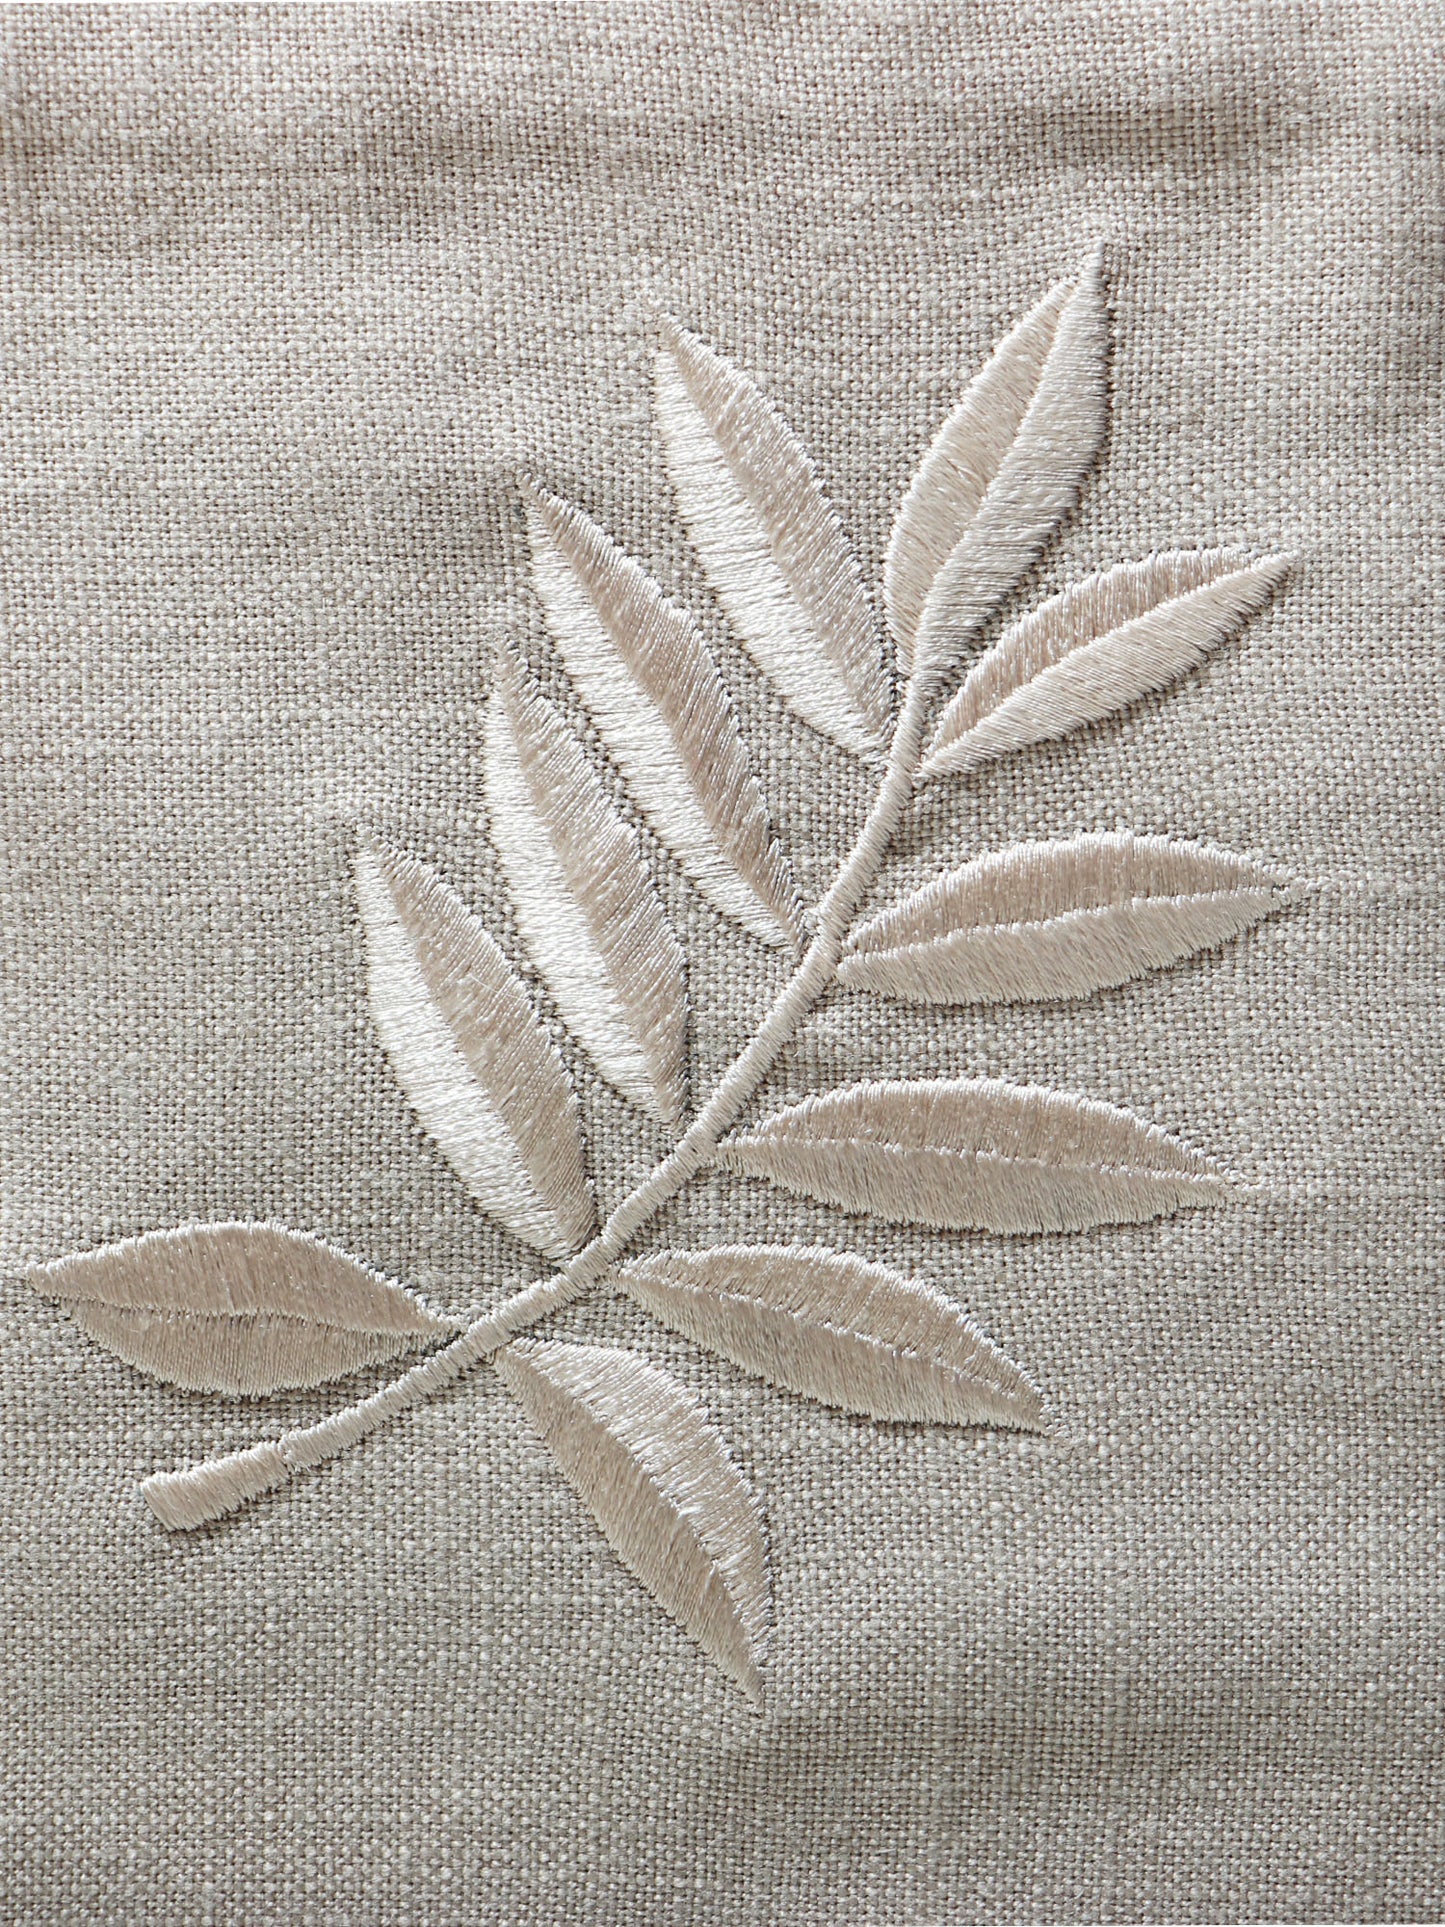 Table Runner Décor, PolyBlend 2 Tone Leaves Embroidered with Tassels - Beige | 12 x 84 inch